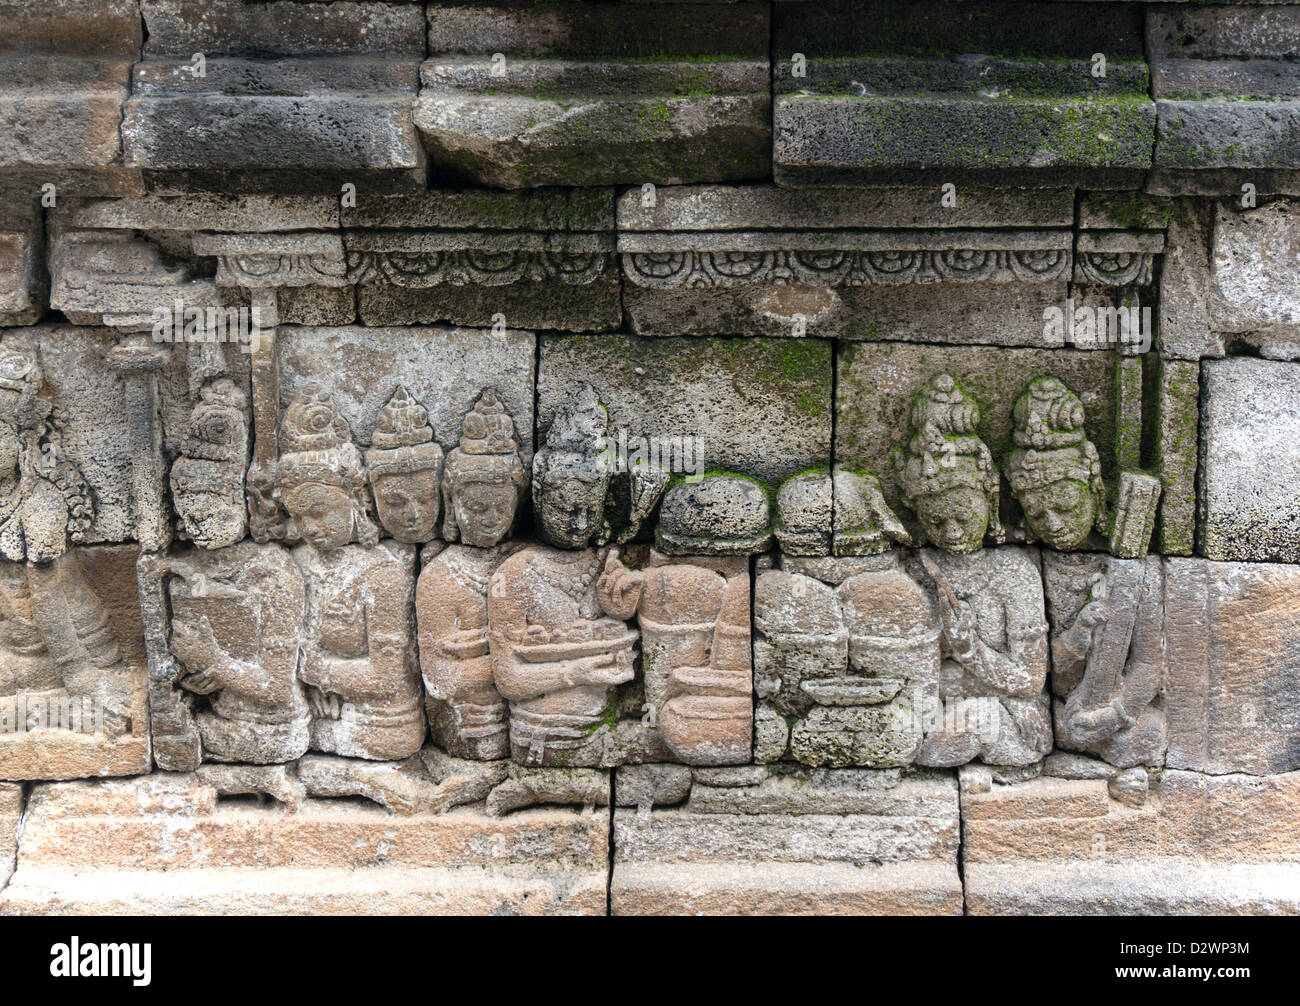 Statues and Carving at Borobudur, Indonesia Stock Photo